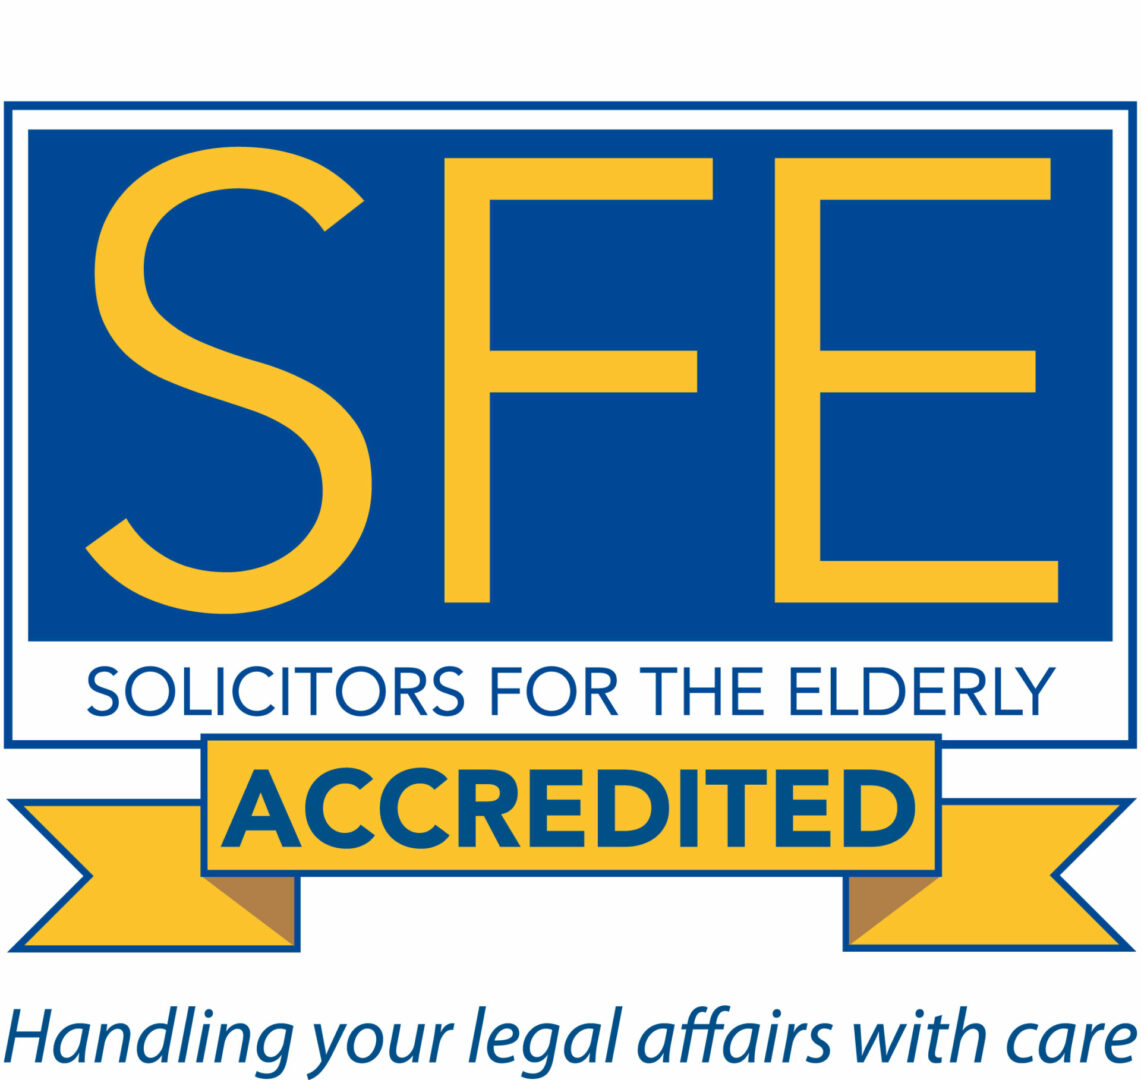 Solicitors for the Elderly